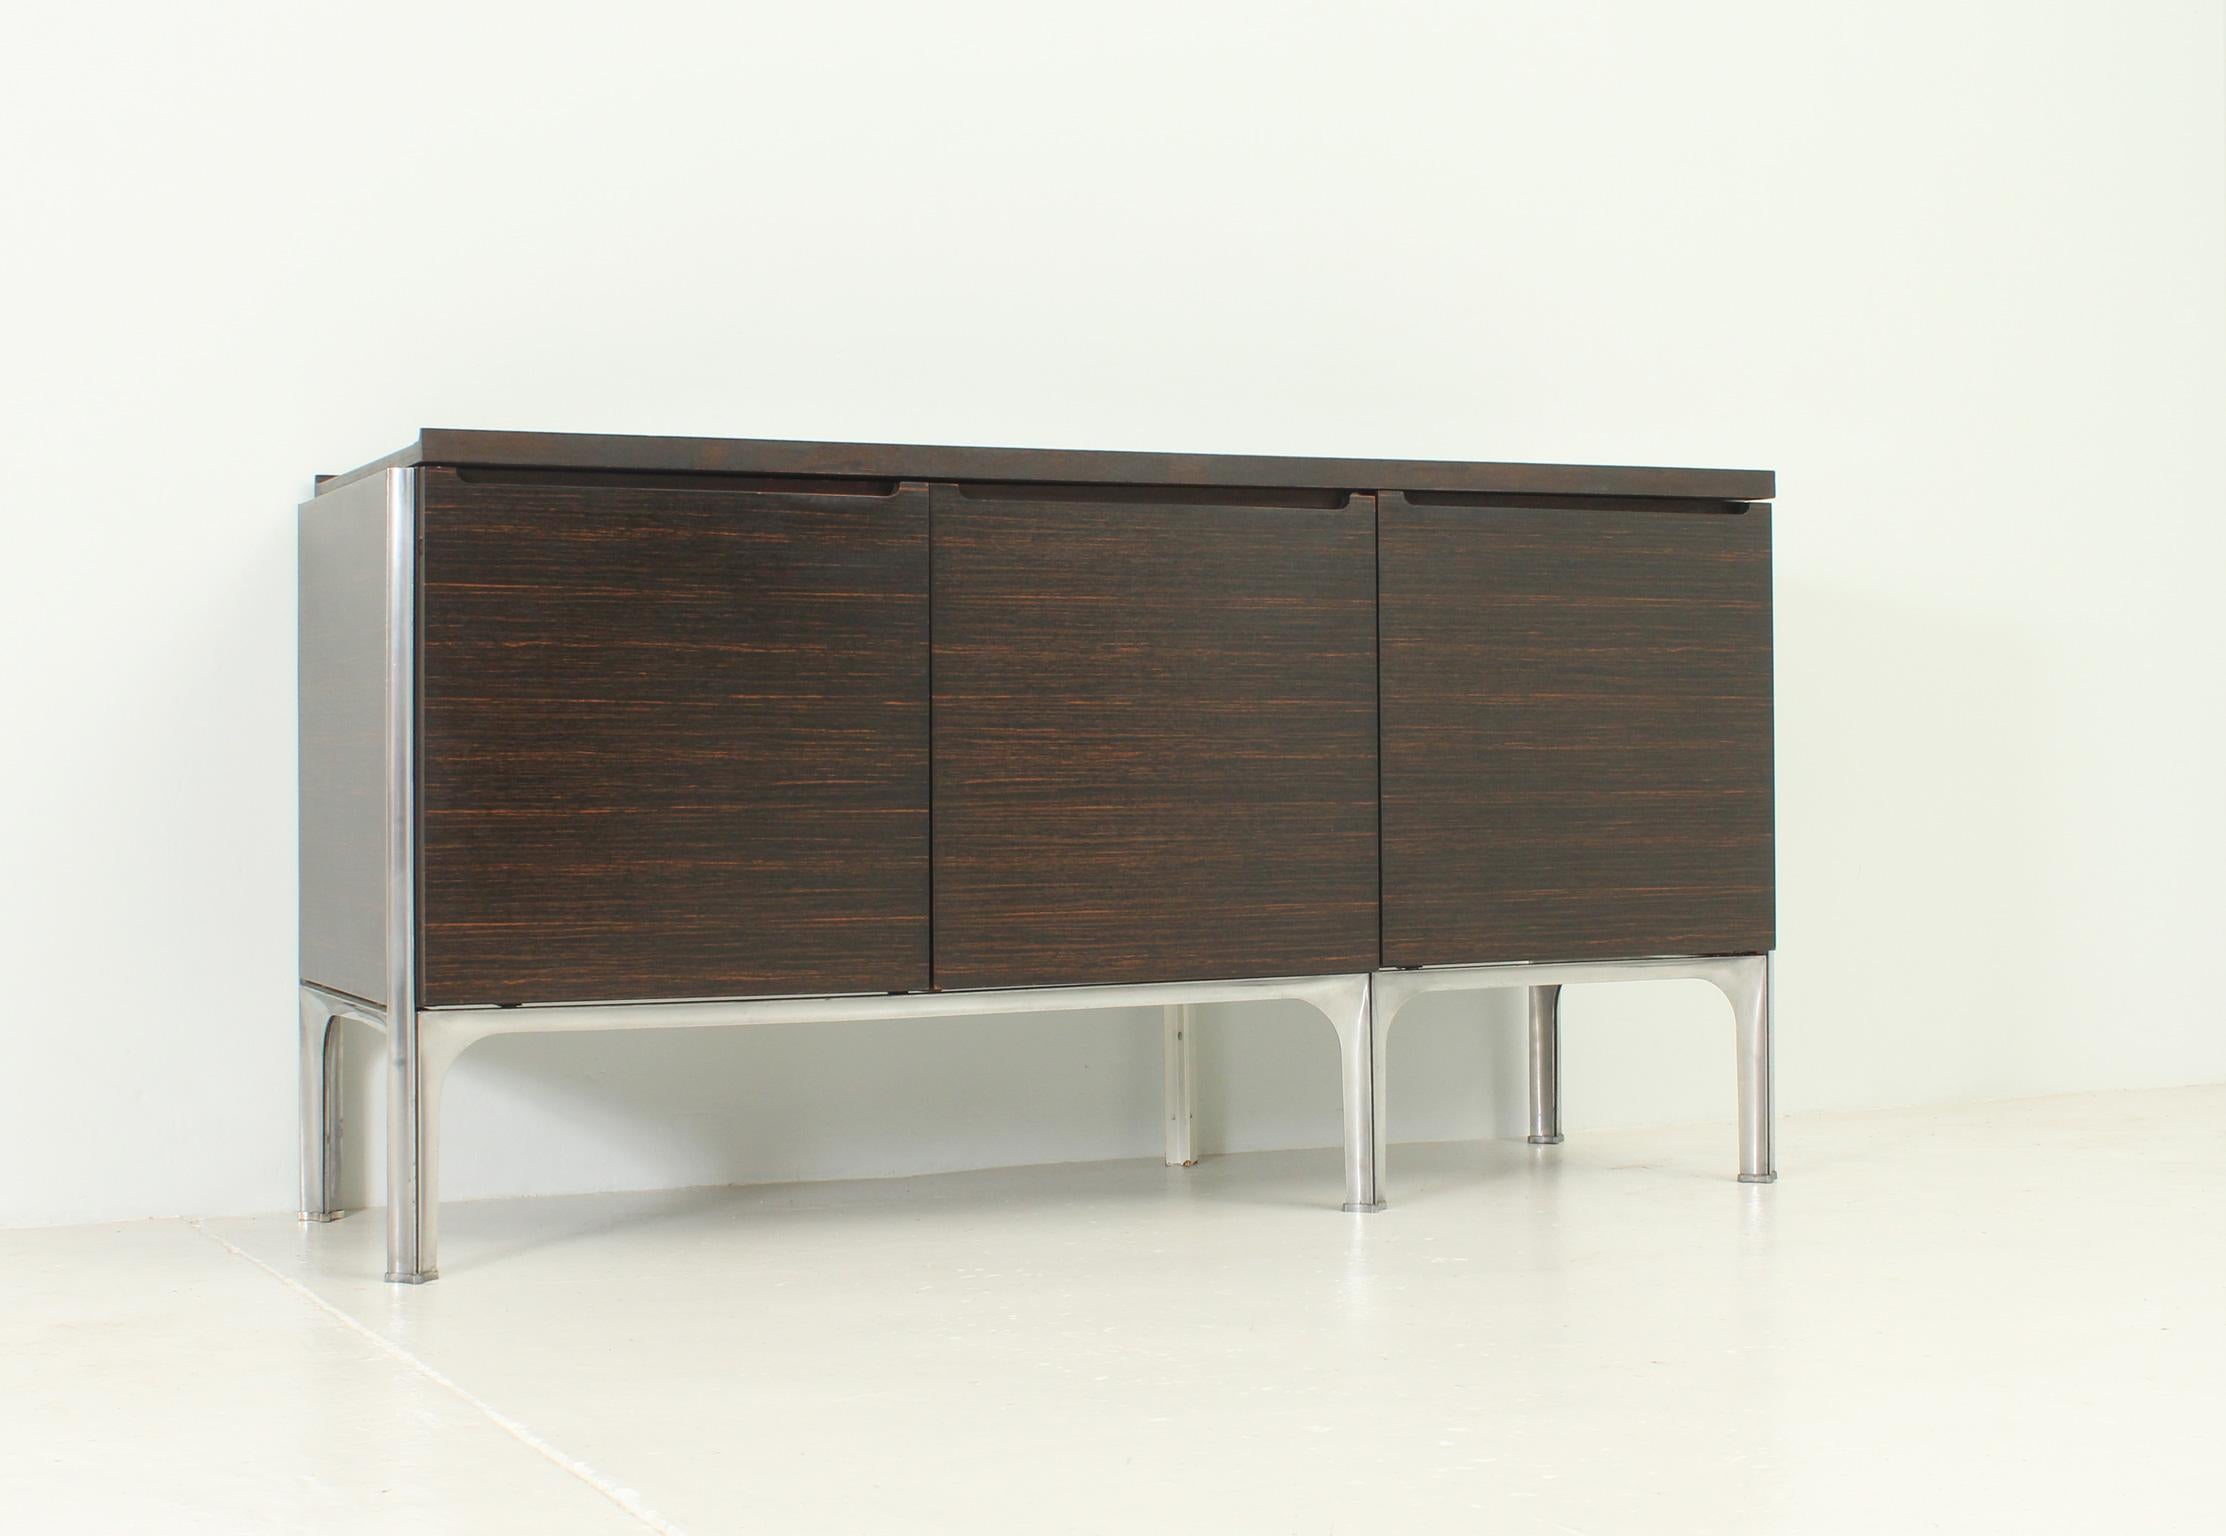 Sideboard designed in 1960's by Raymond Loewy and edited by DF 2000, France. Hardwood, lacquered wood and steel structure. Three spaces with one drawer and removable tray for bottles.